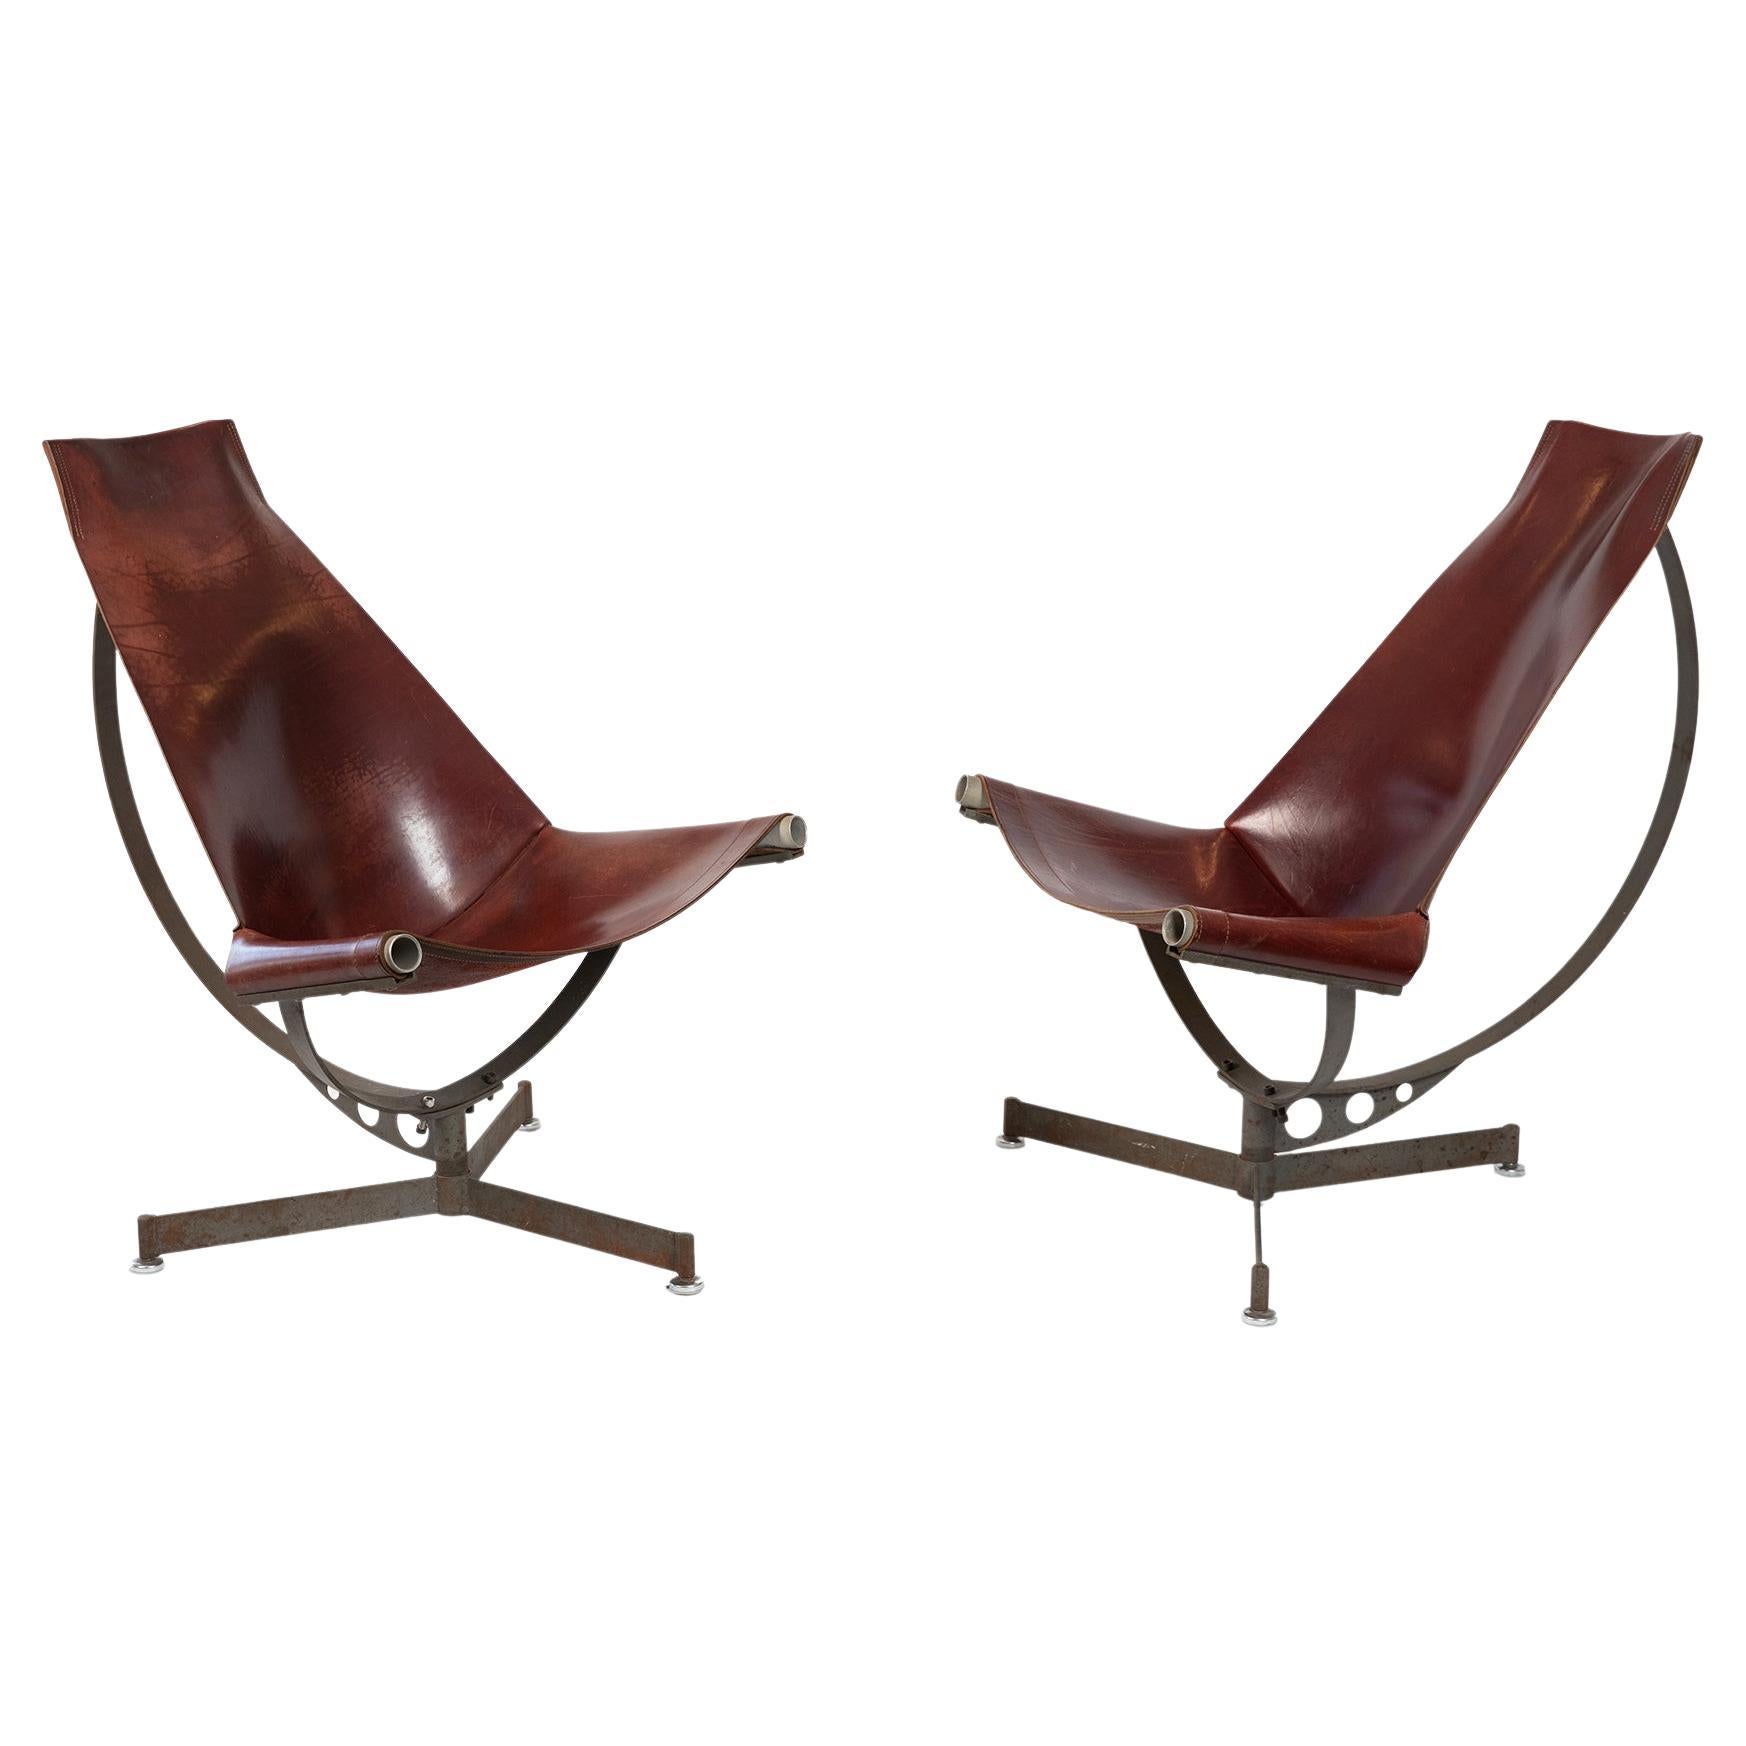 Sling Chairs by Max Gottschalk in Saddle Leather & Iron